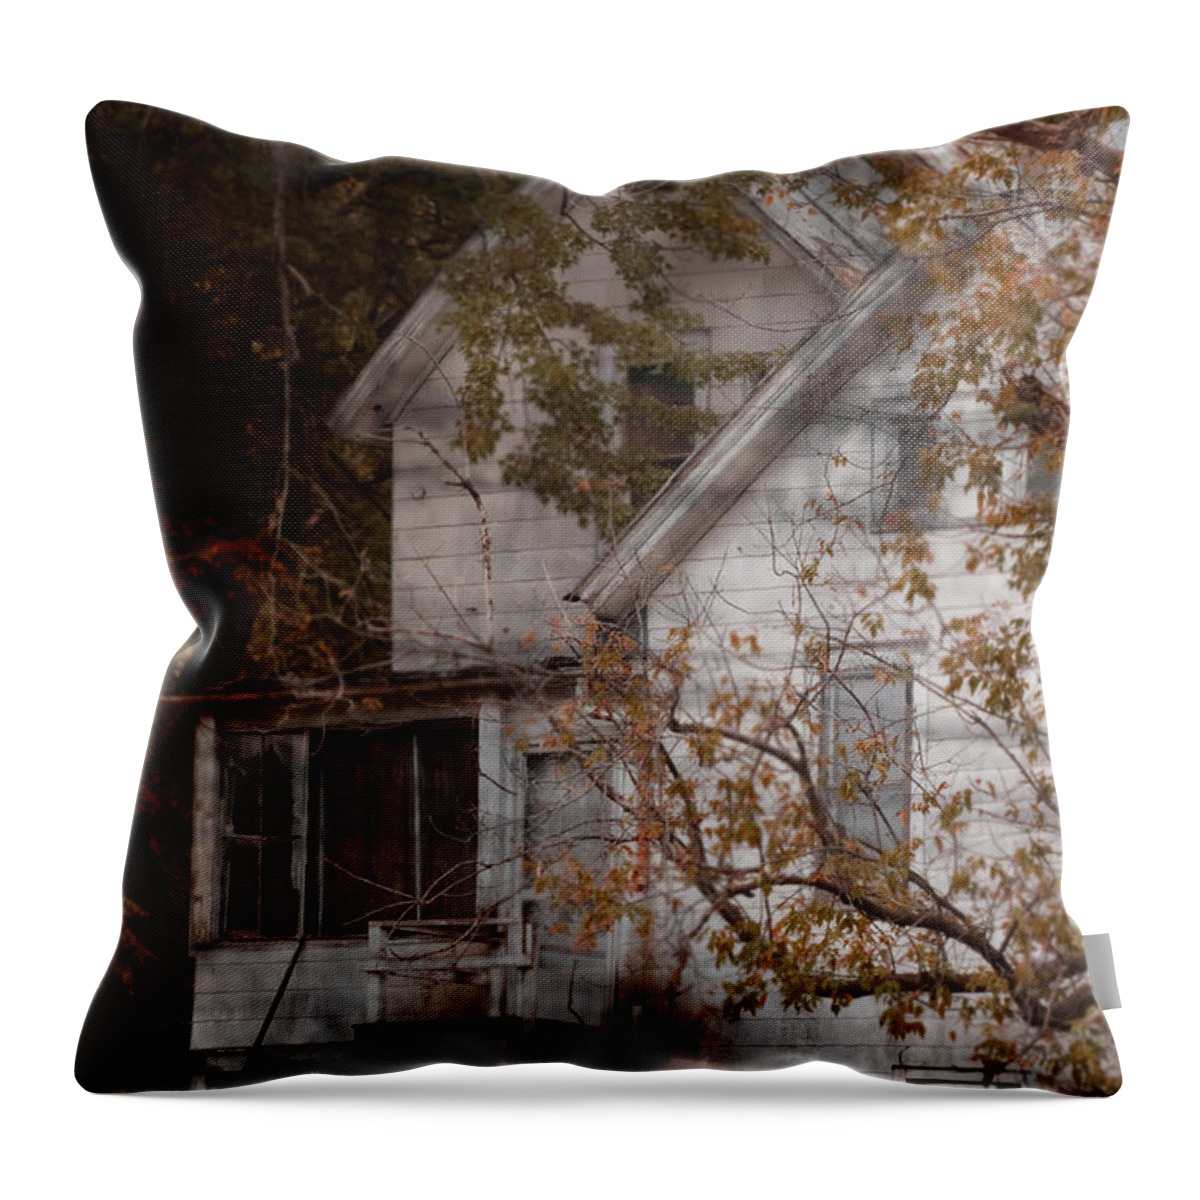 Abandoned; Home; House; Old; Farmhouse; Spooky; Peeling Paint; Derelict; Neglected; Sidewalk; Creepy; Dark; Entrance; Stairs; Door; Haunted; Porch; Eerie; Scary; Ruin; Mood; Gloomy; Rural Throw Pillow featuring the photograph House in Fall by Margie Hurwich